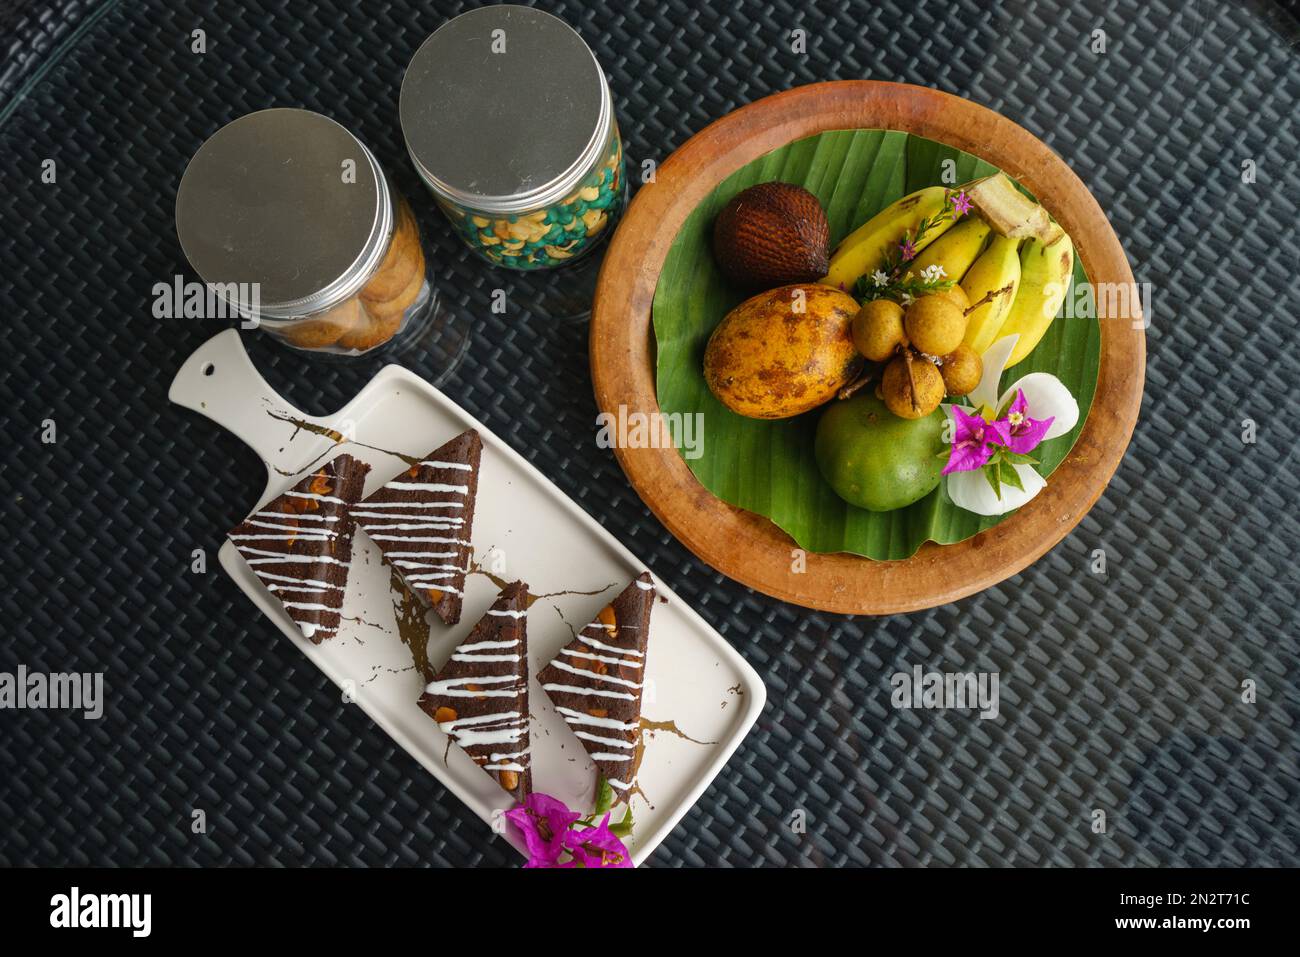 Overhead view of slices of chocolate cake, fresh fruit and jars of biscuits and snacks Stock Photo